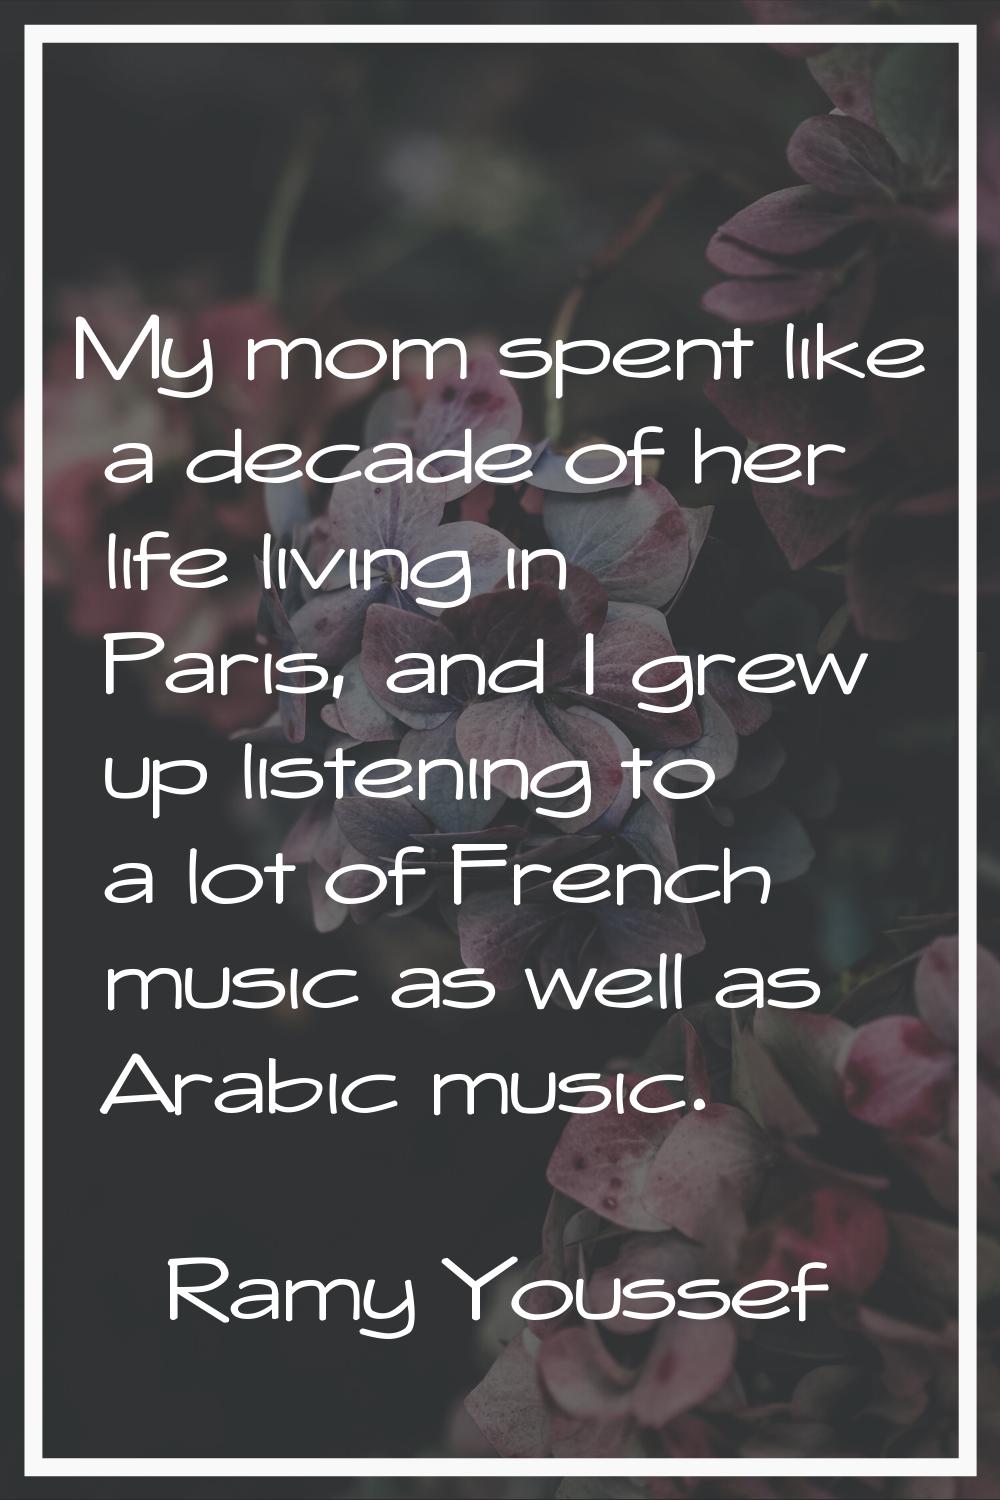 My mom spent like a decade of her life living in Paris, and I grew up listening to a lot of French 